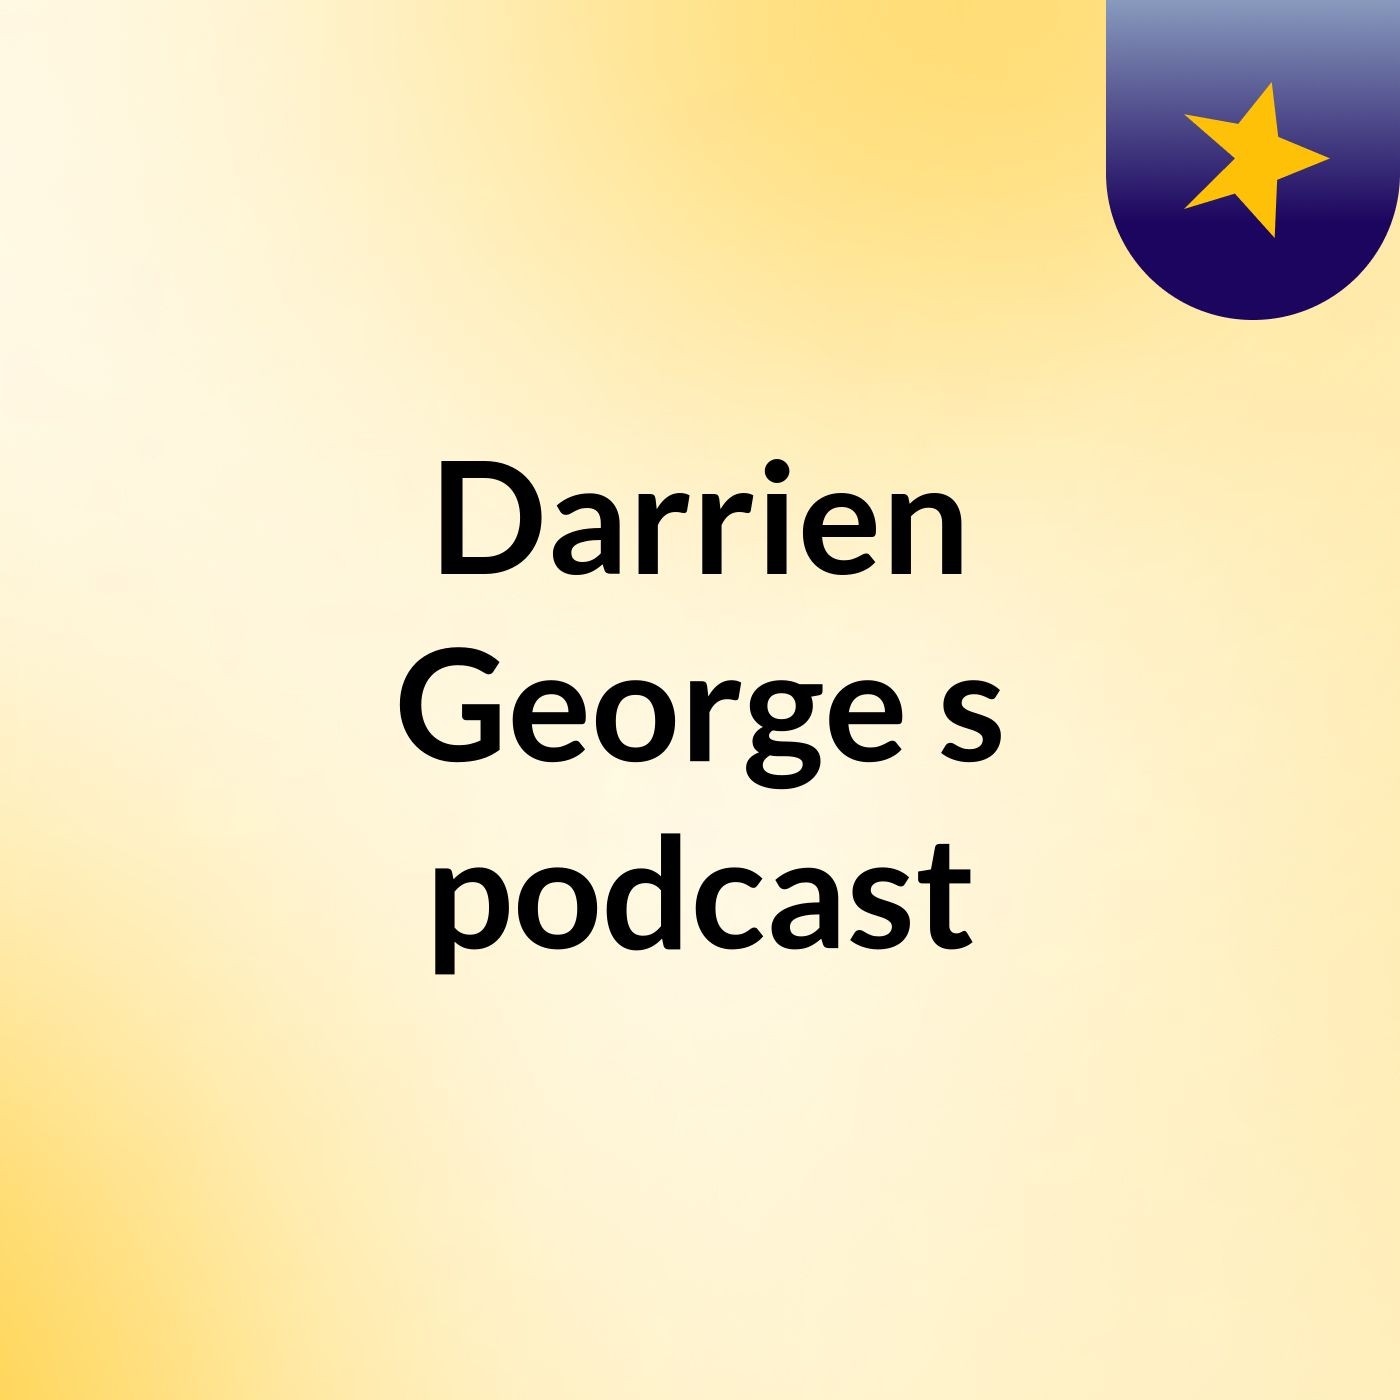 Darrien George's podcast